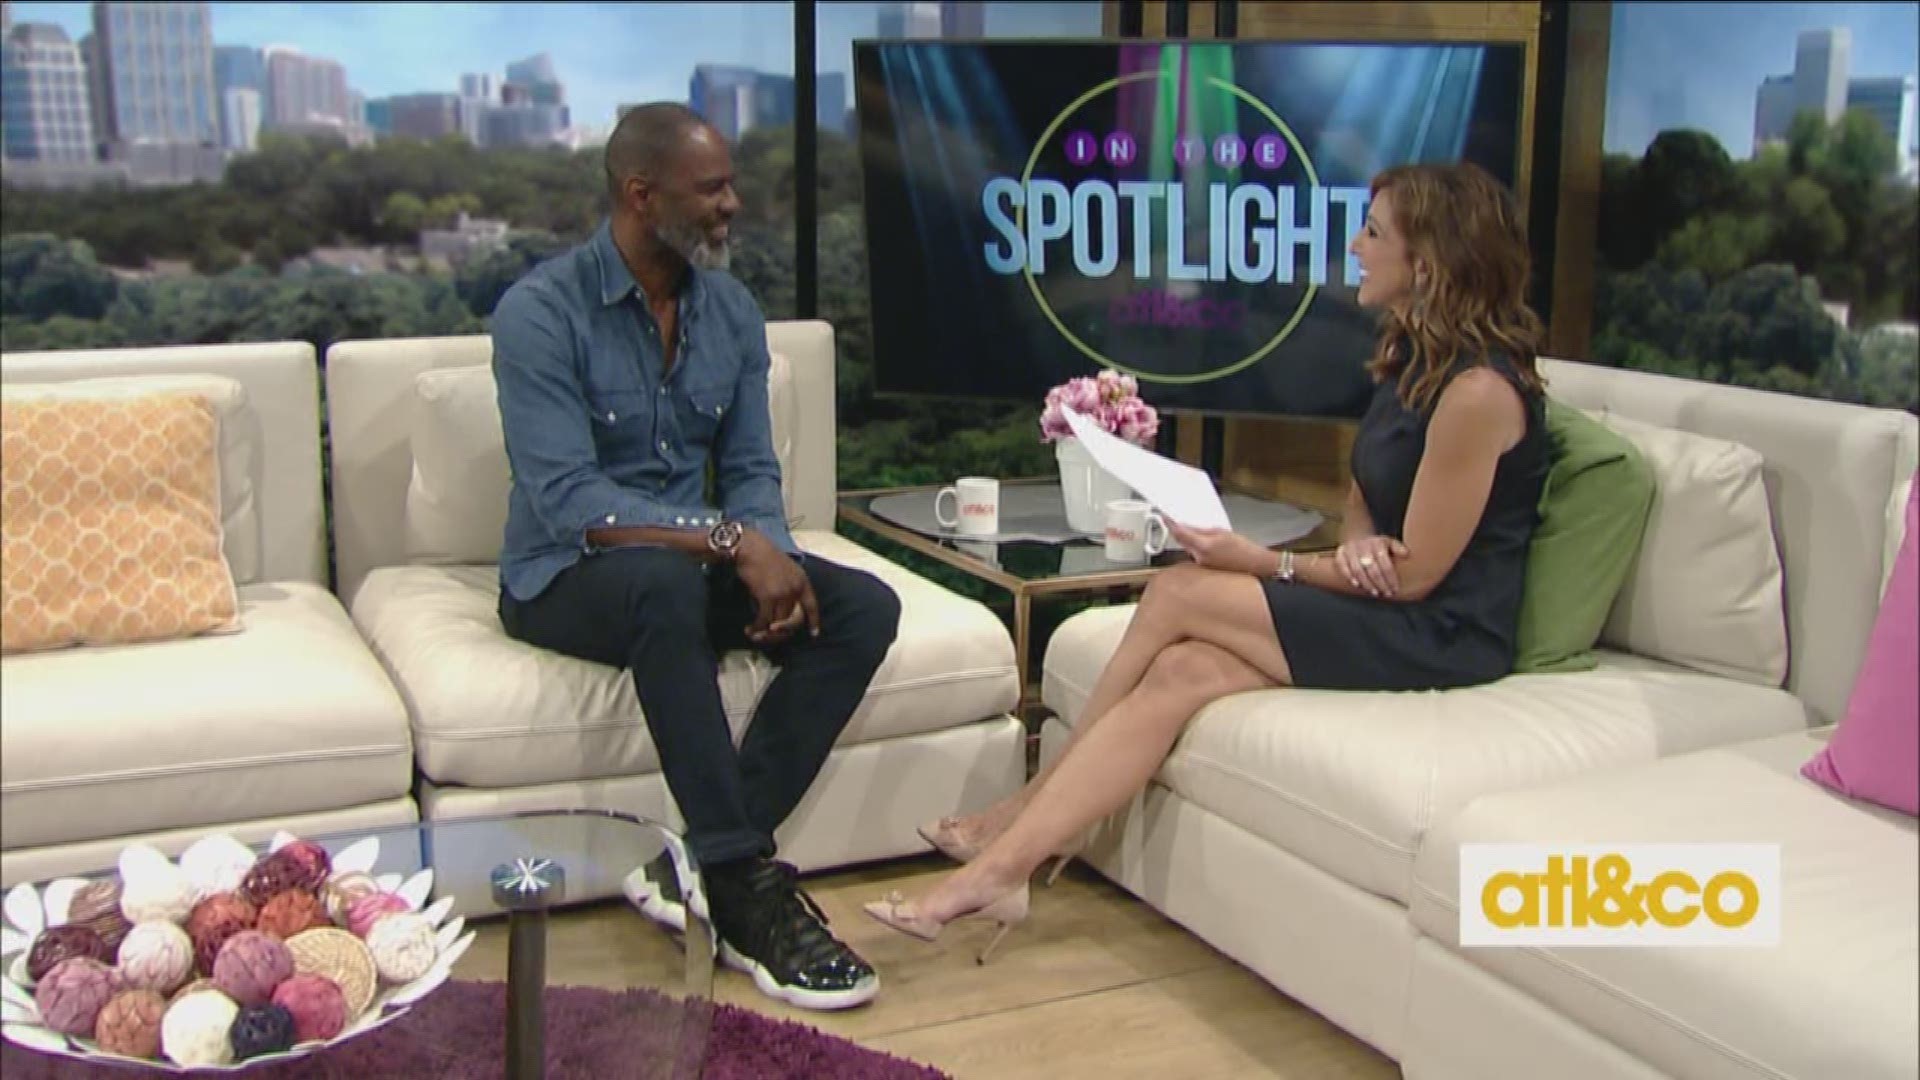 R&B superstar Brian McKnight talks about his Grammy-nominated career and new music on 'Atlanta & Company'